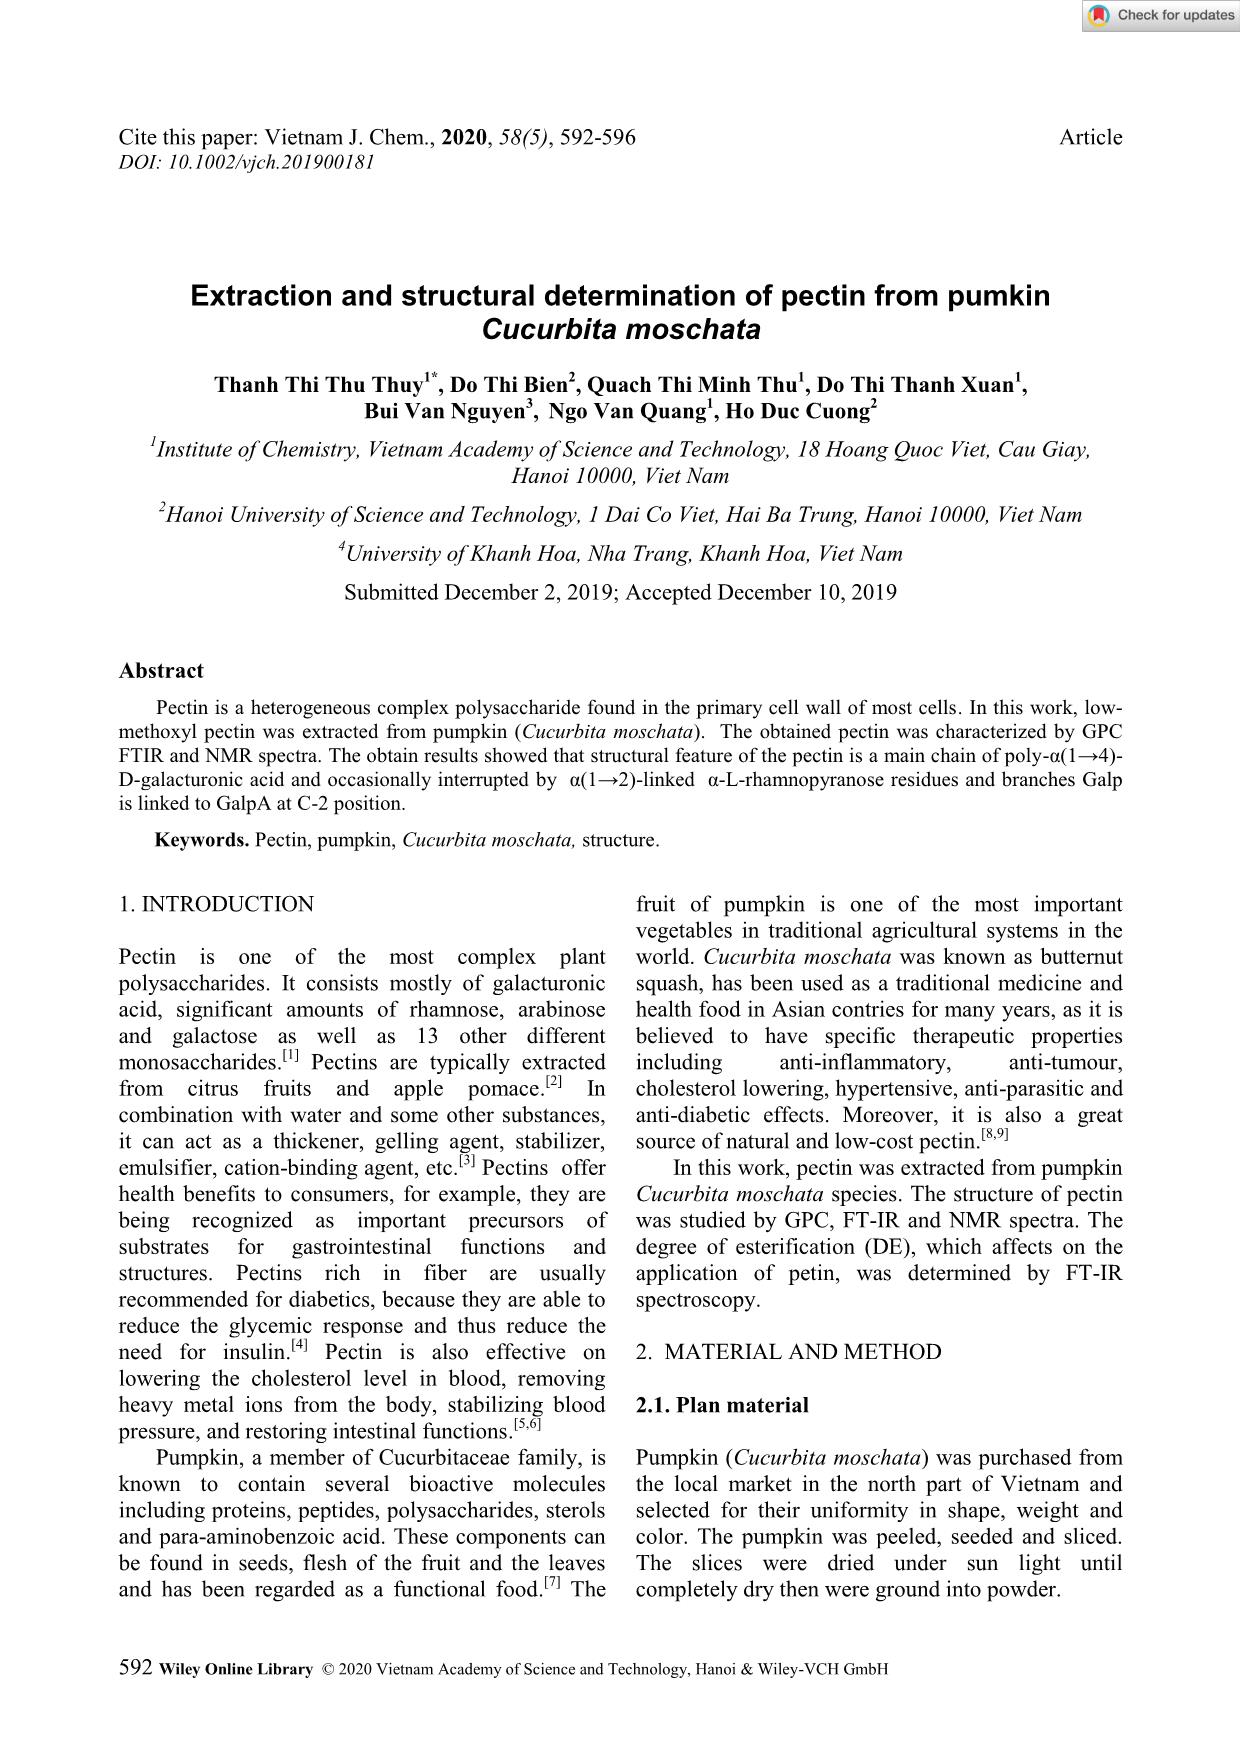 Extraction and structural determination of pectin from pumkin Cucurbita moschata trang 1